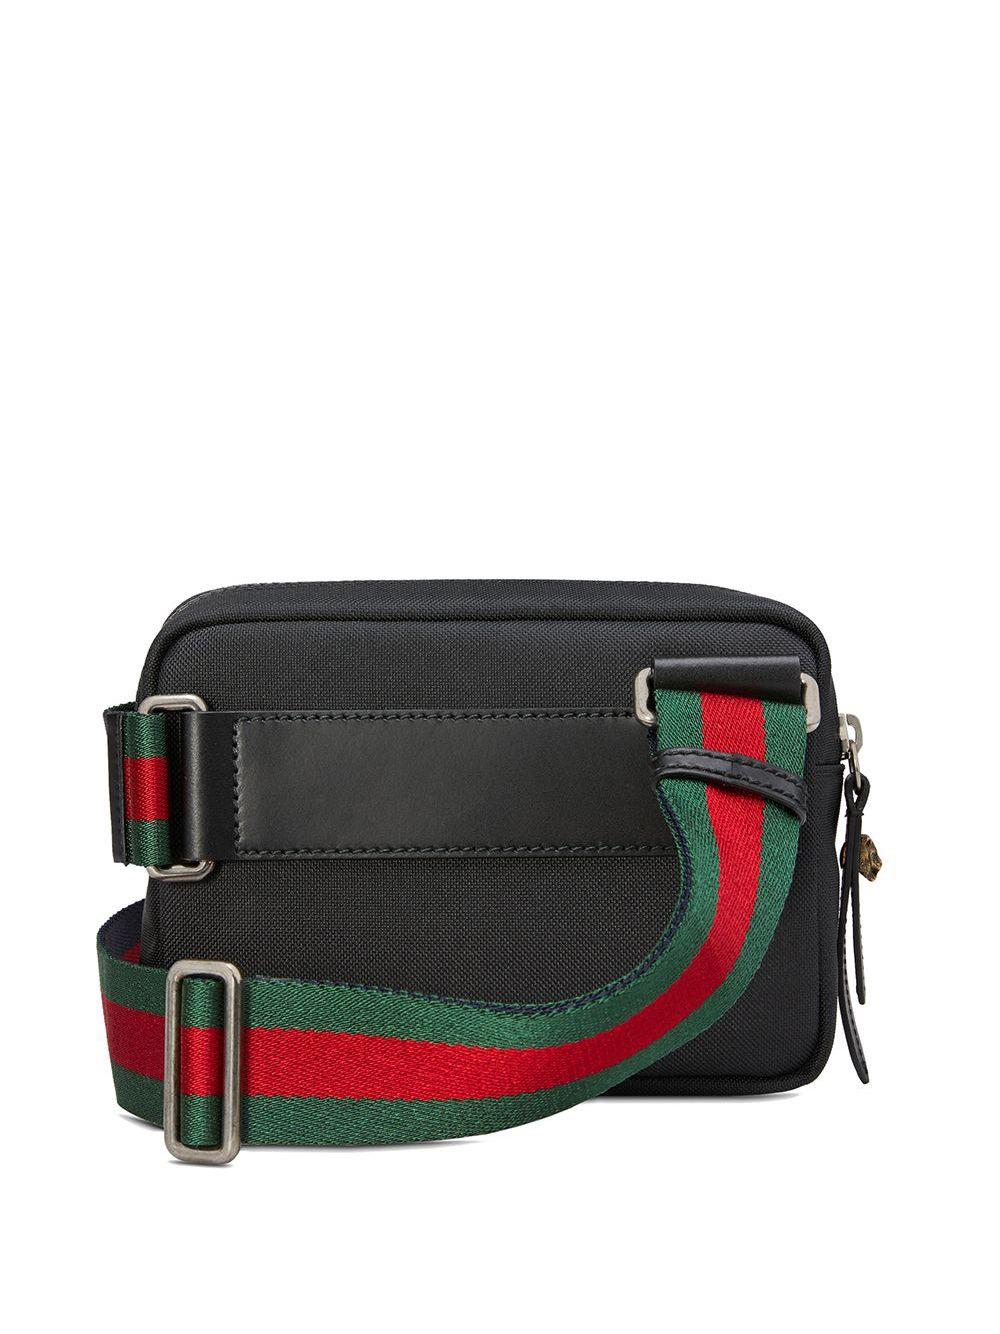 banane gucci homme,Save up to 17%,www.ilcascinone.com